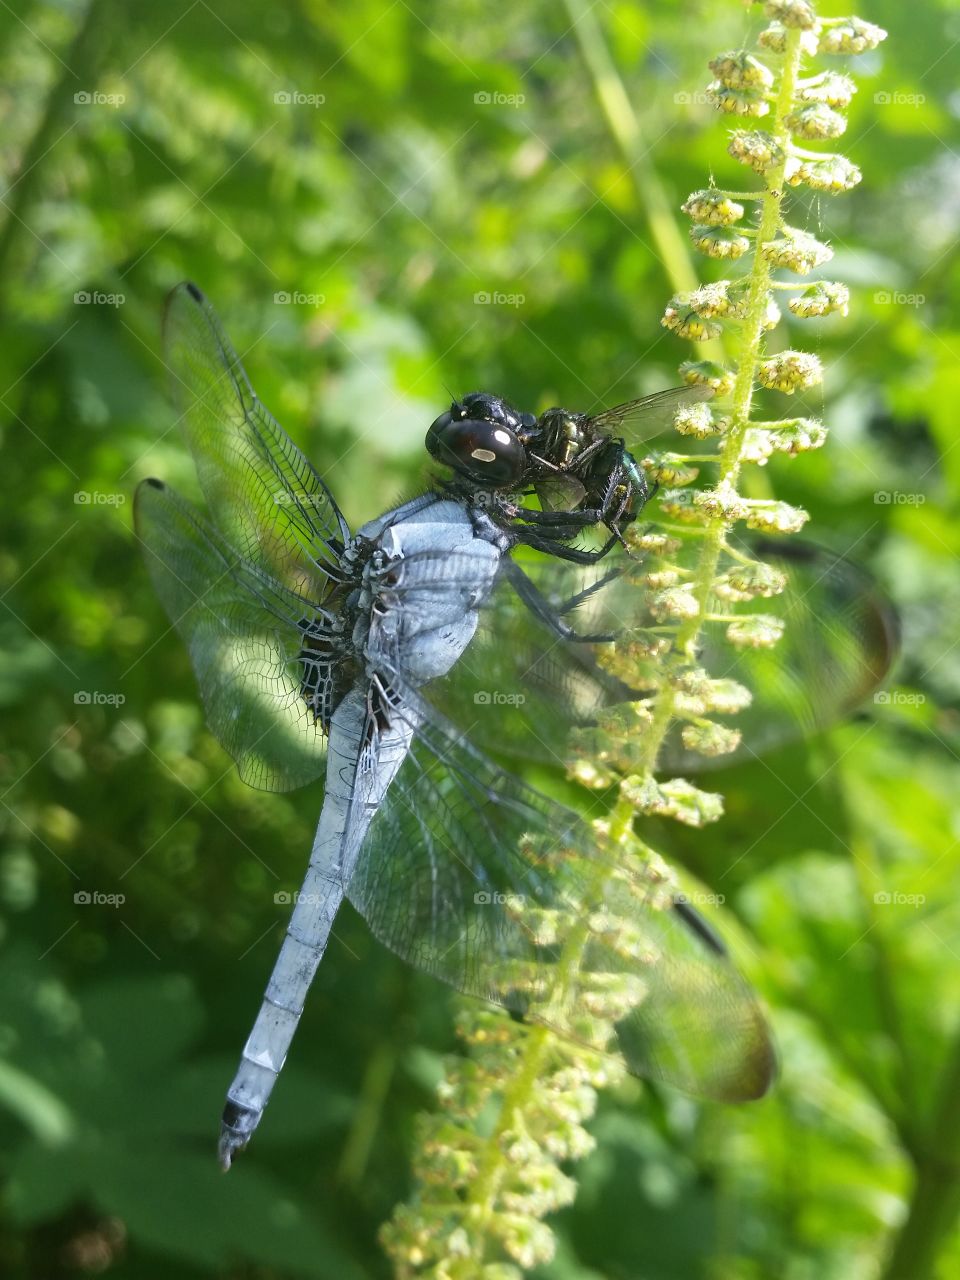 Dragonfly eating the fly!